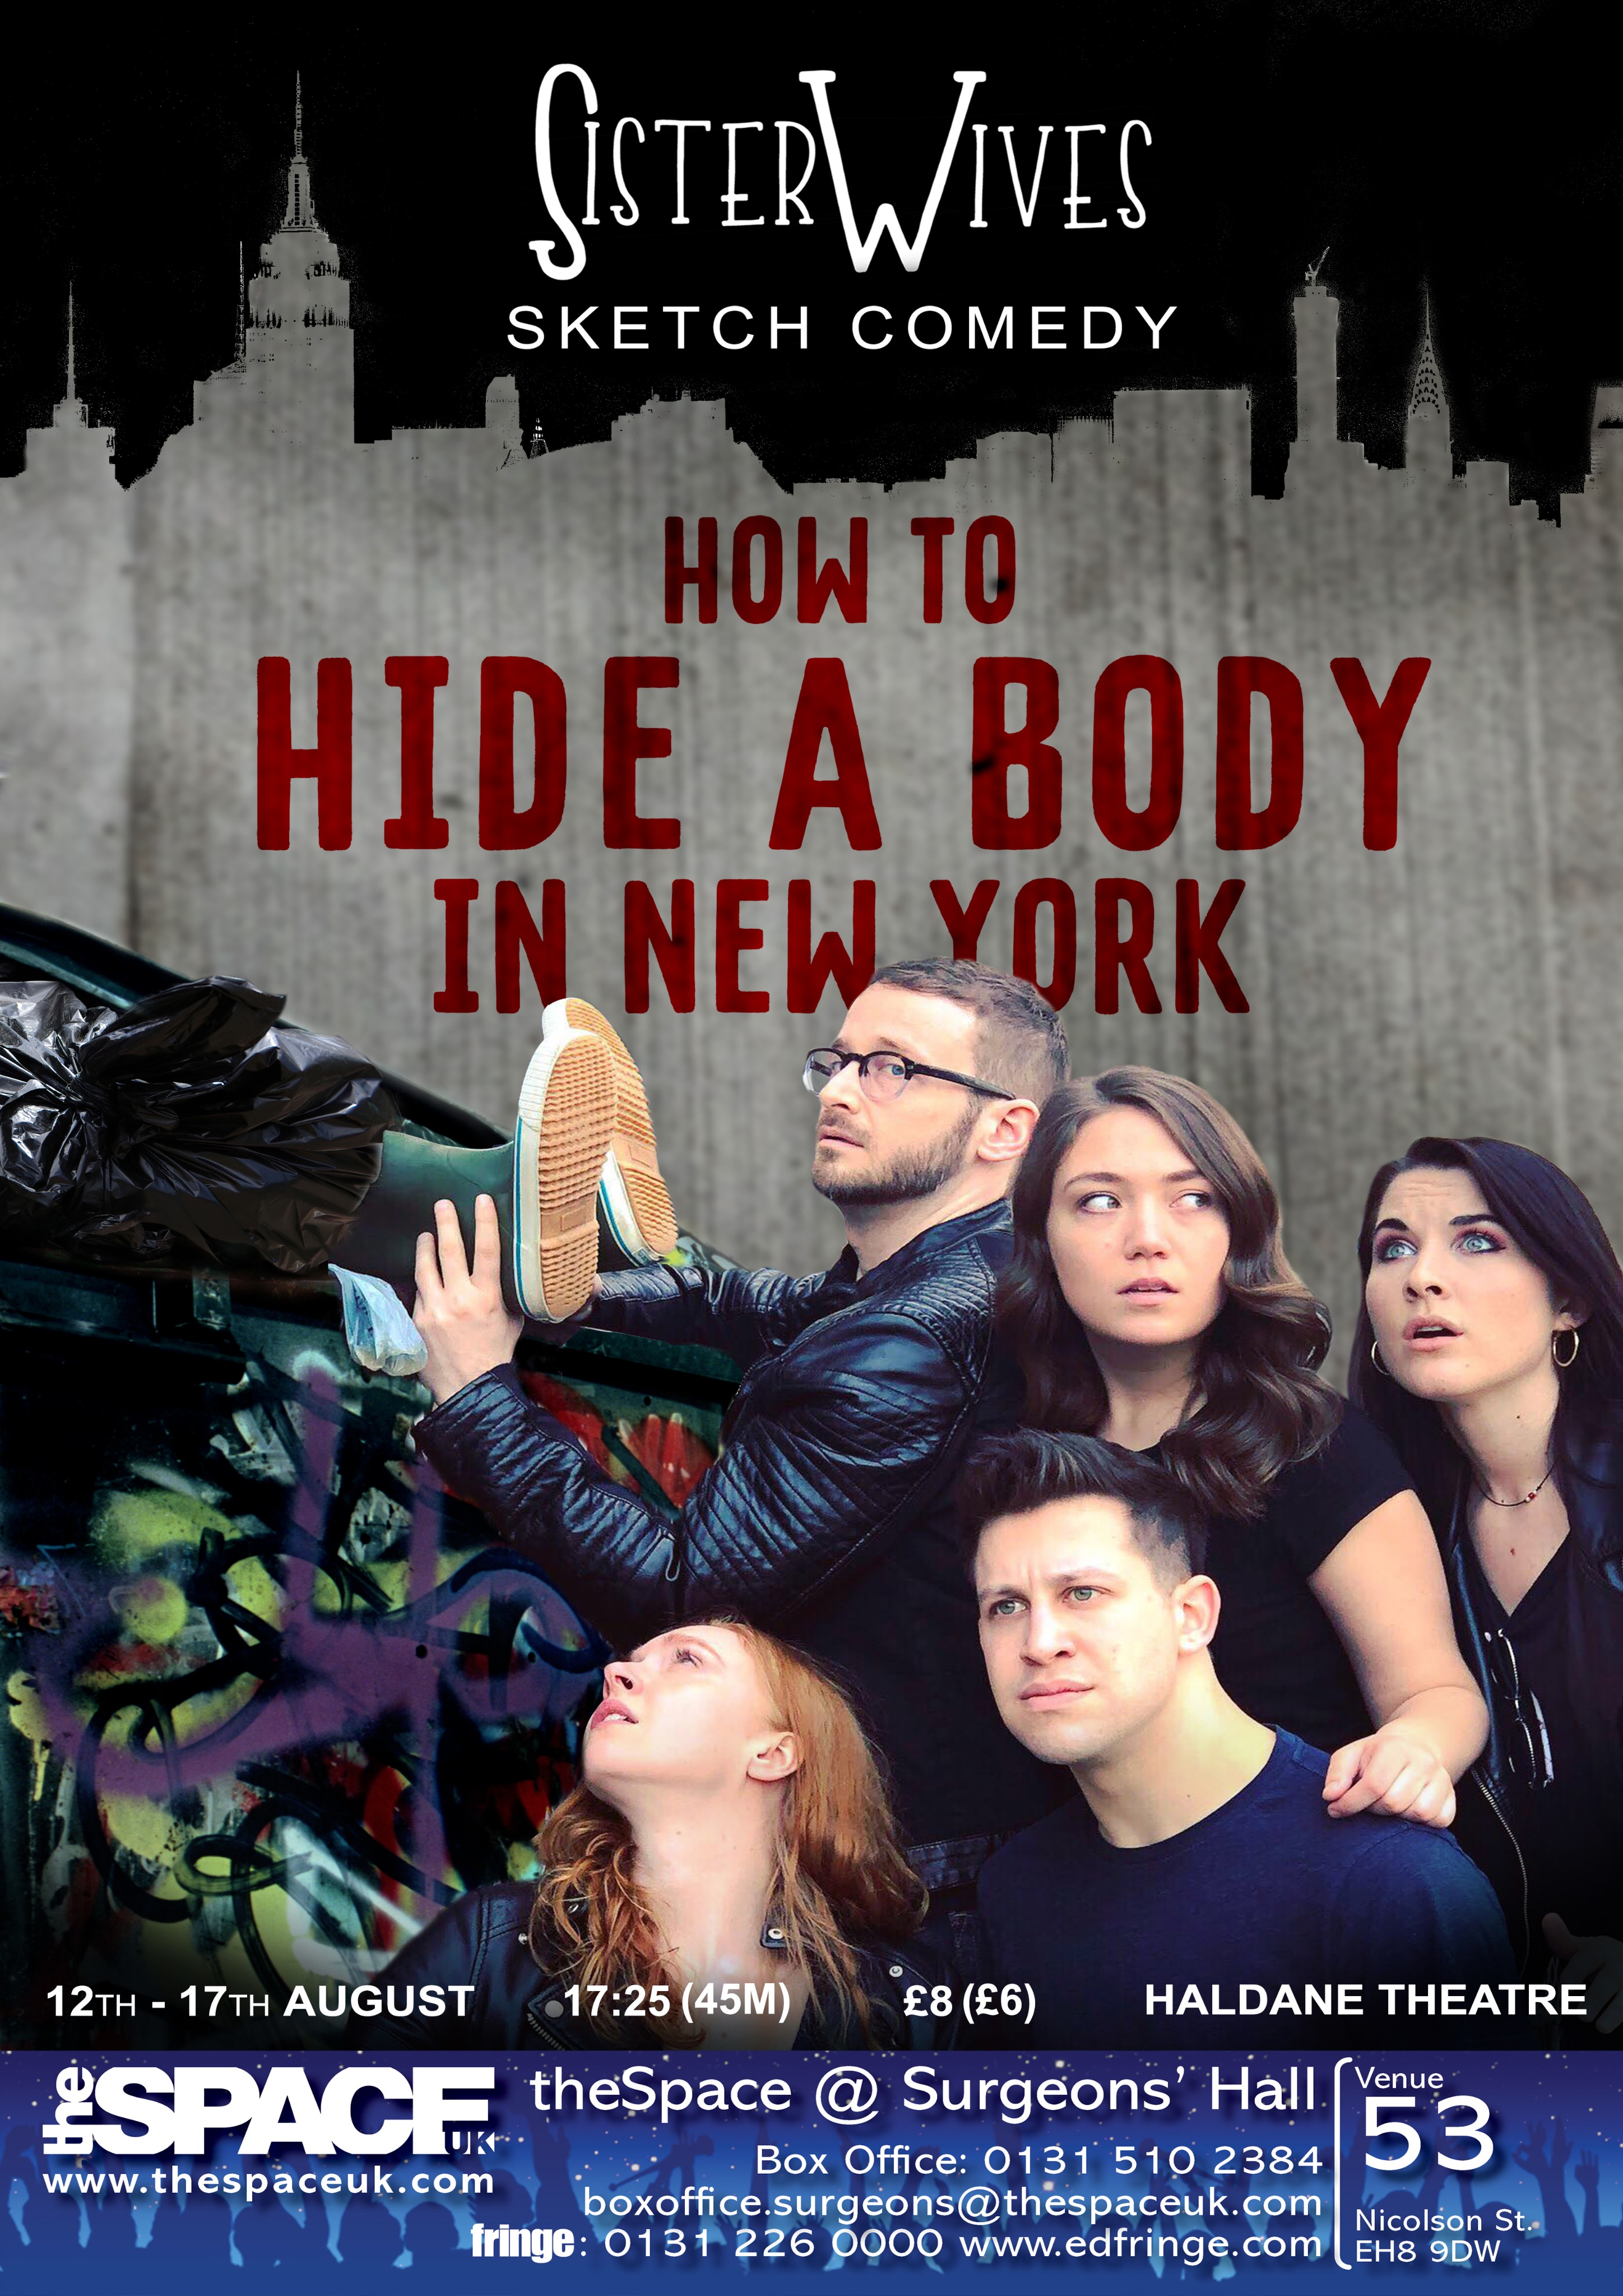 The poster for How to Hide a Body in New York